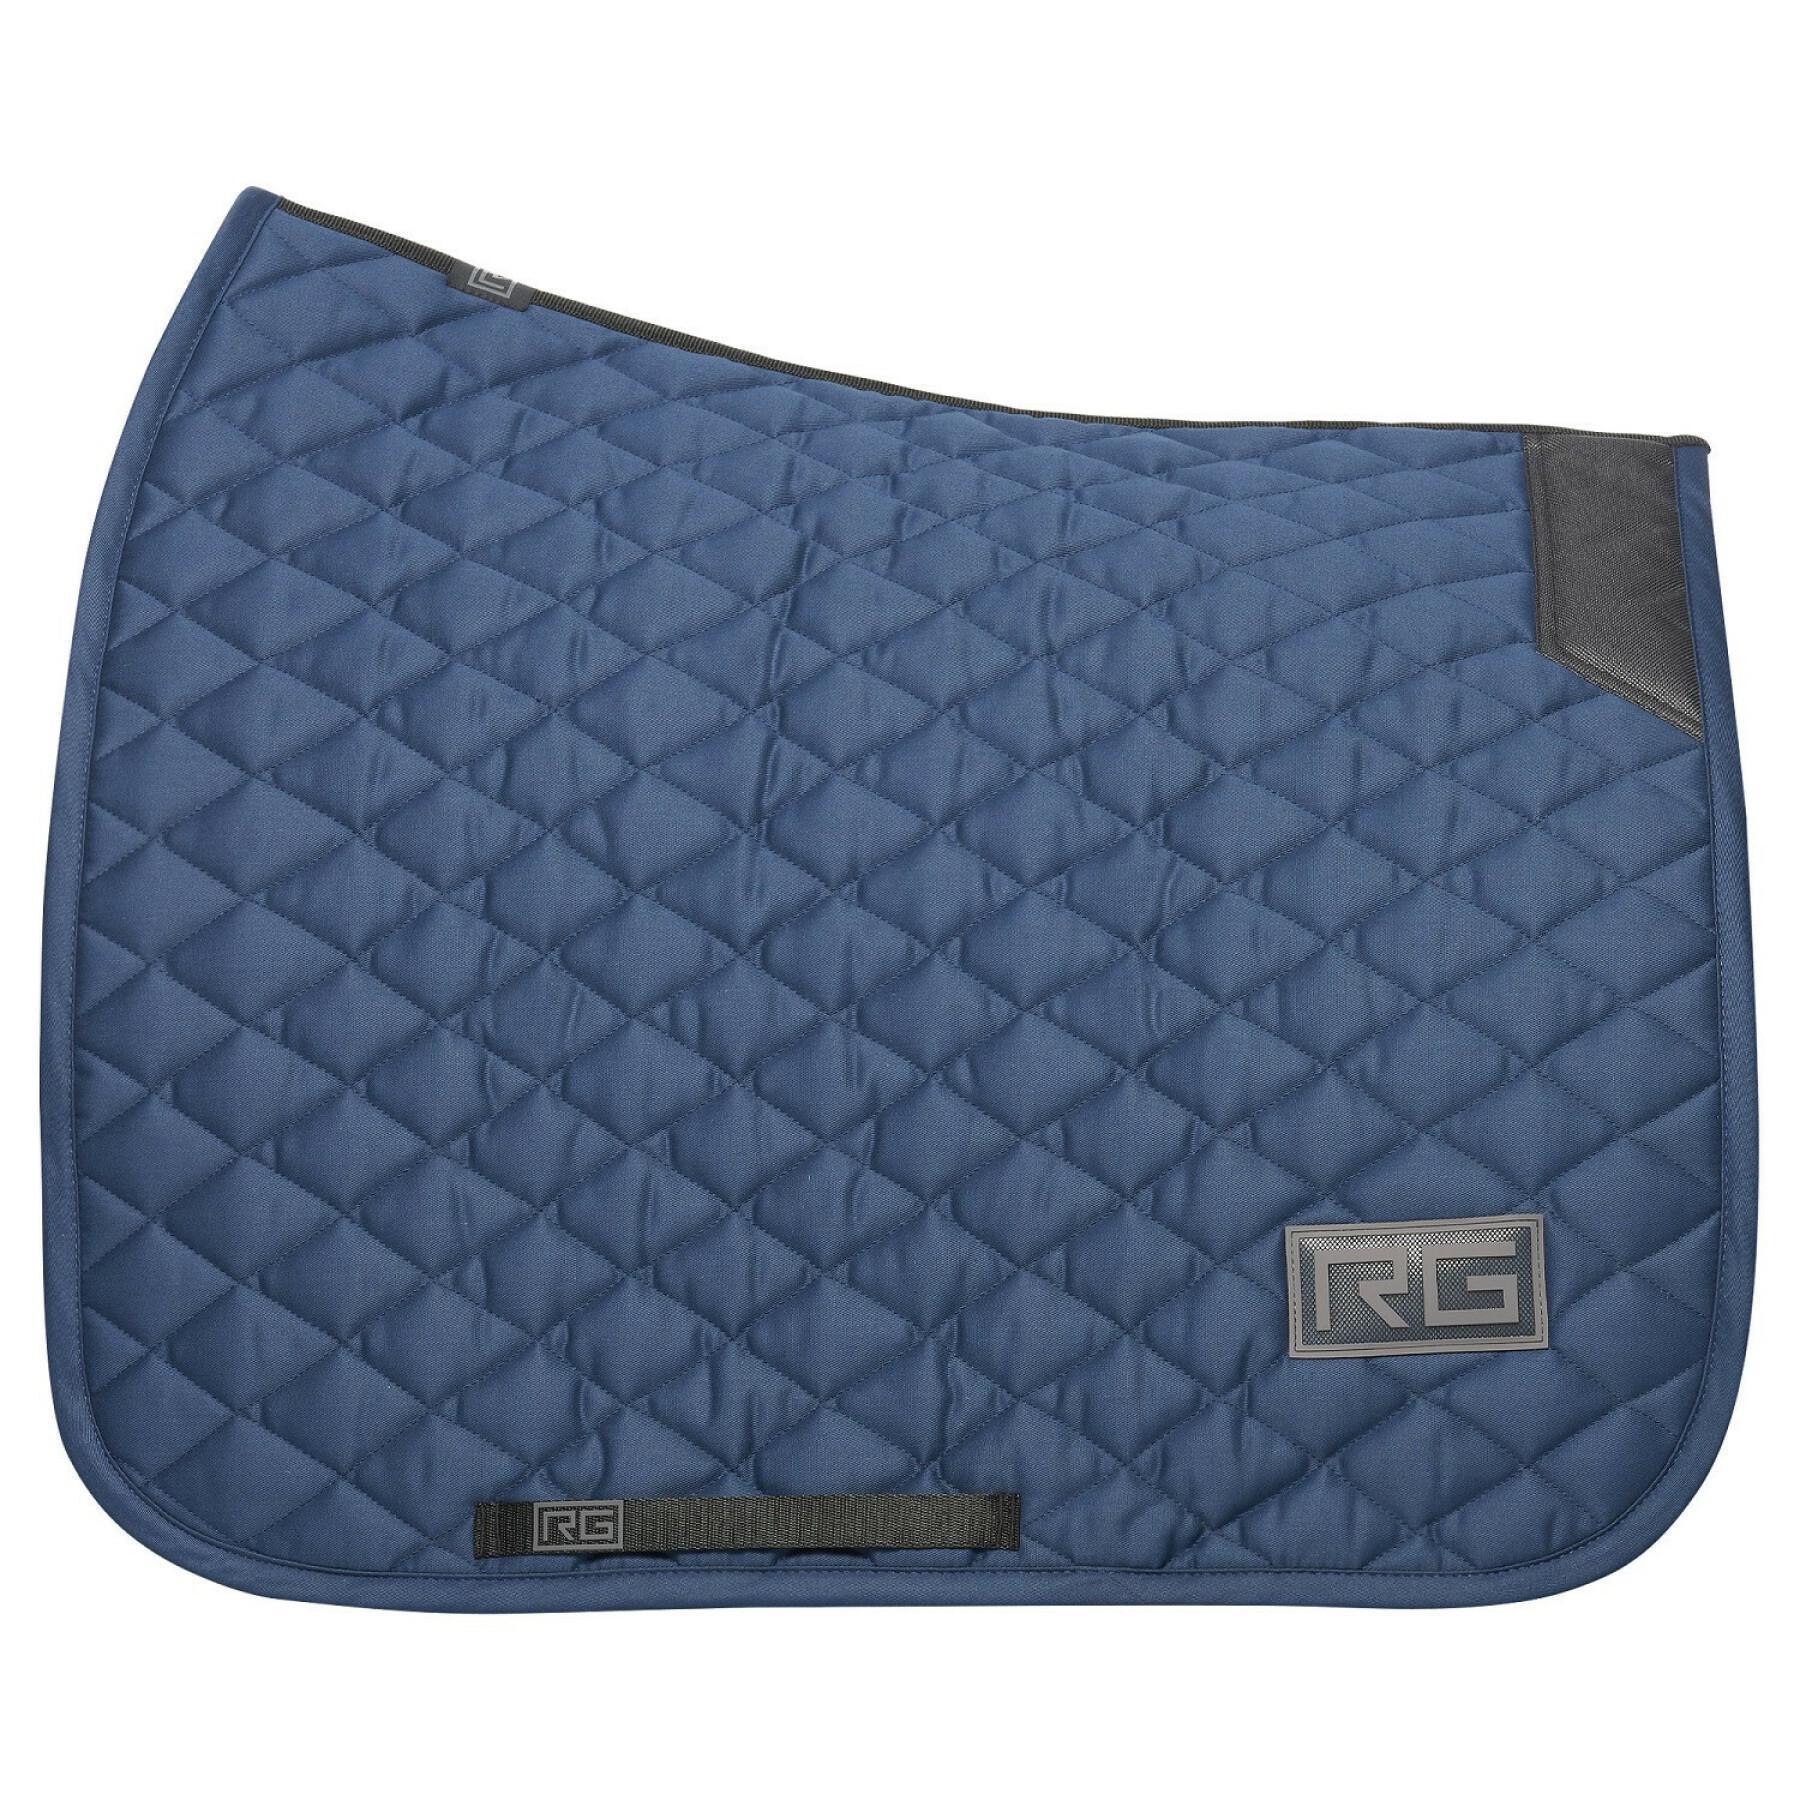 Dressage mat for horses RG Italy